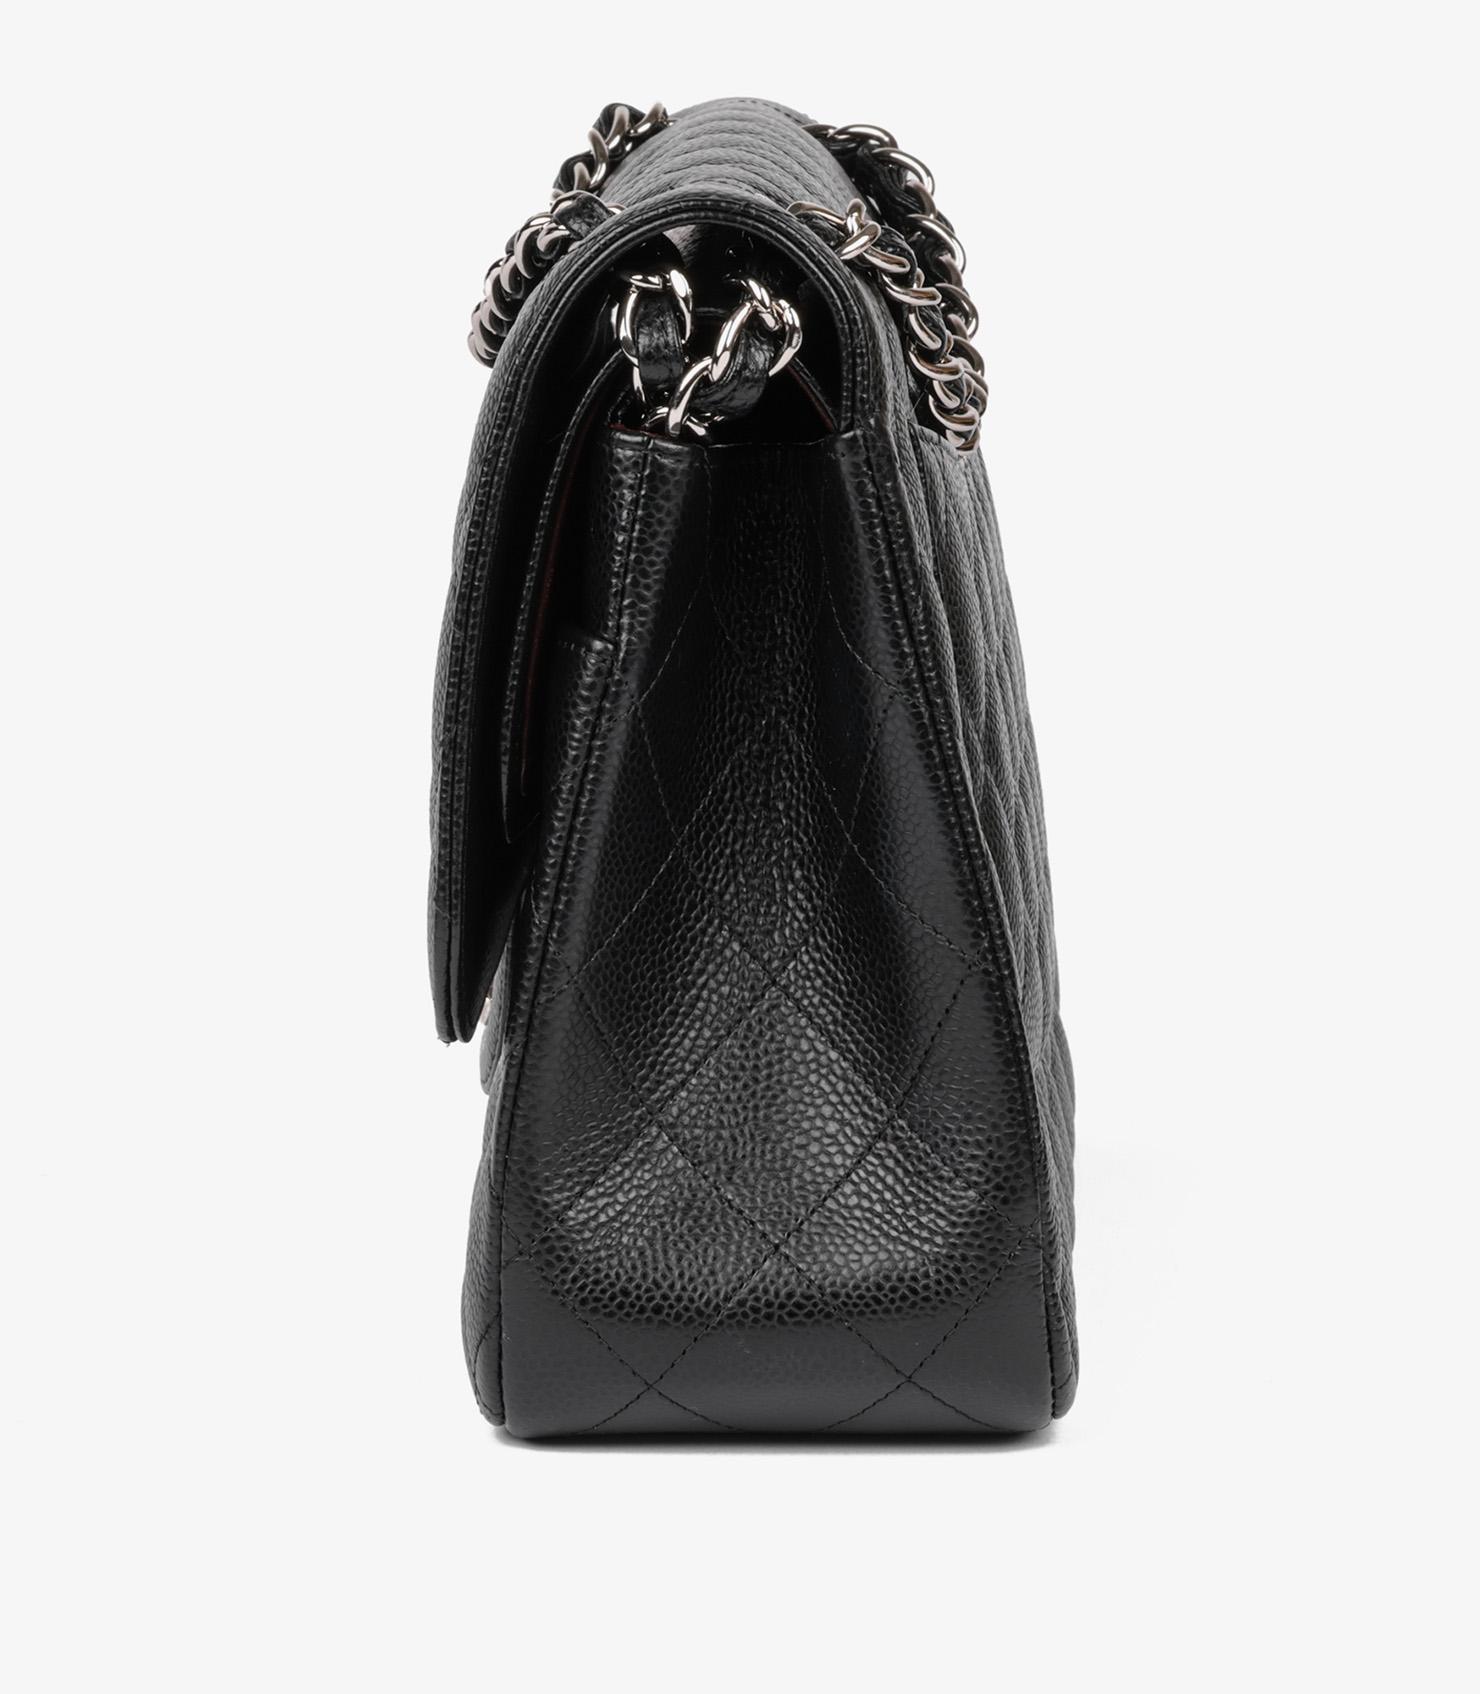 Chanel Black Caviar Leather Jumbo Classic Double Flap Bag For Sale 2